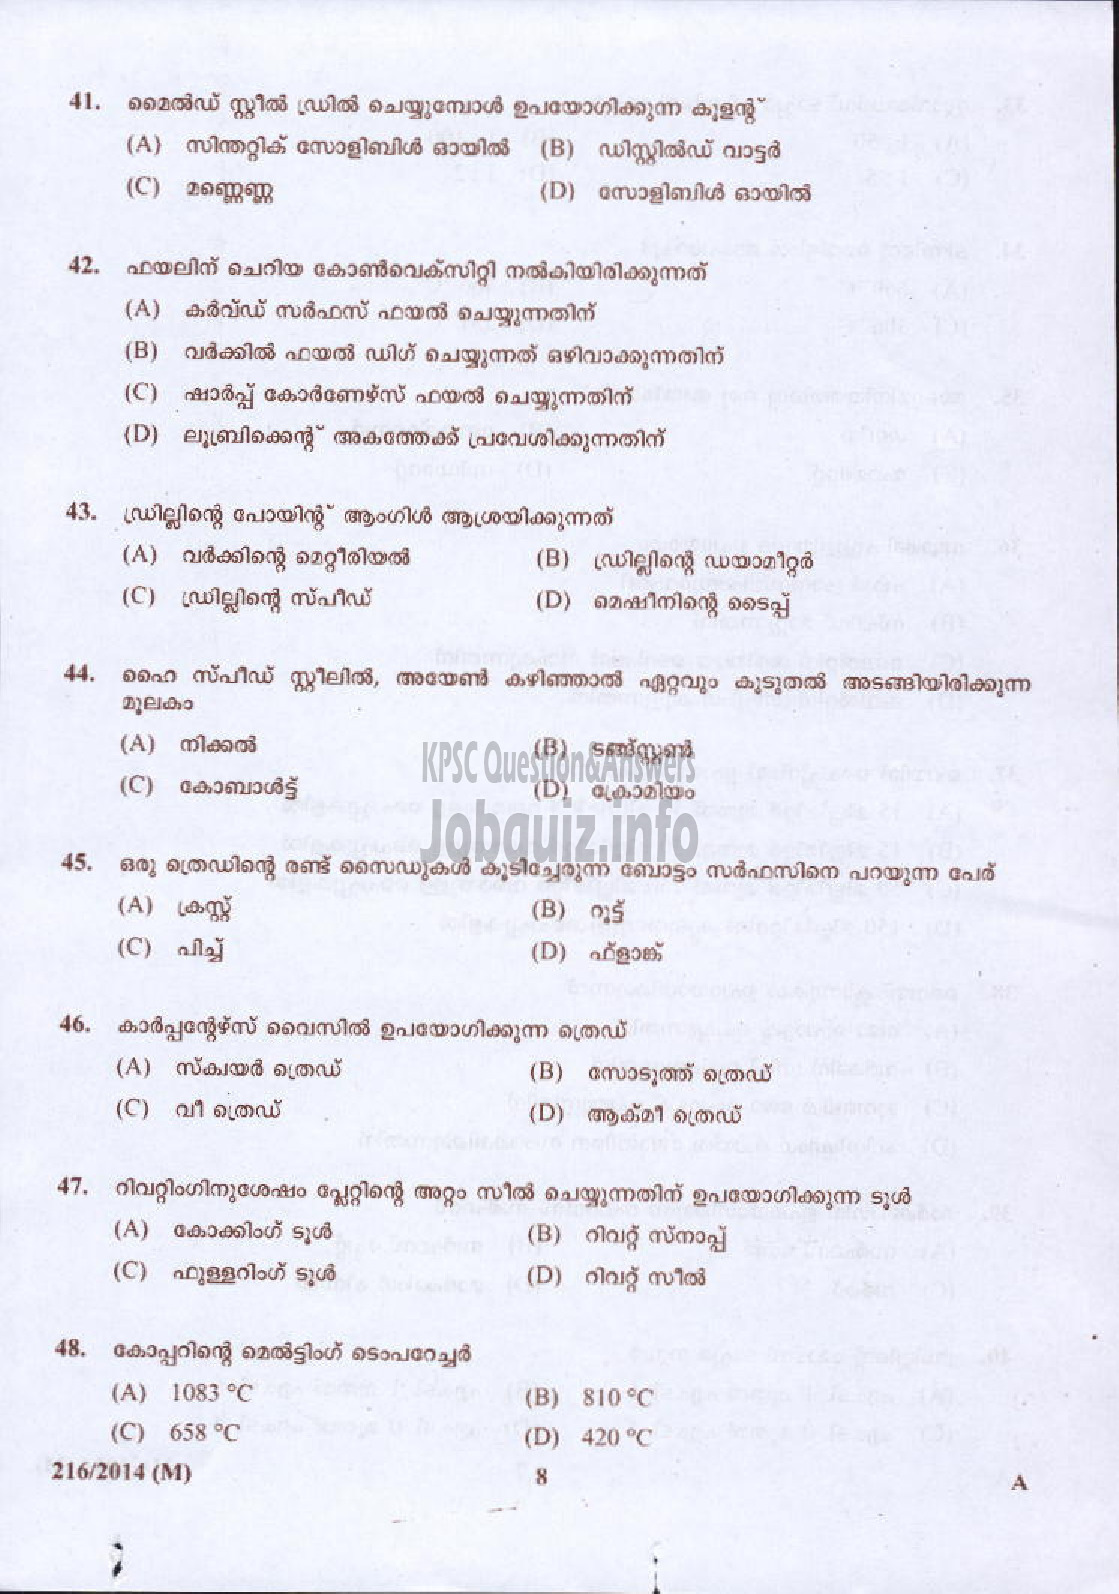 Kerala PSC Question Paper - FITTER AGRICULTURE-8